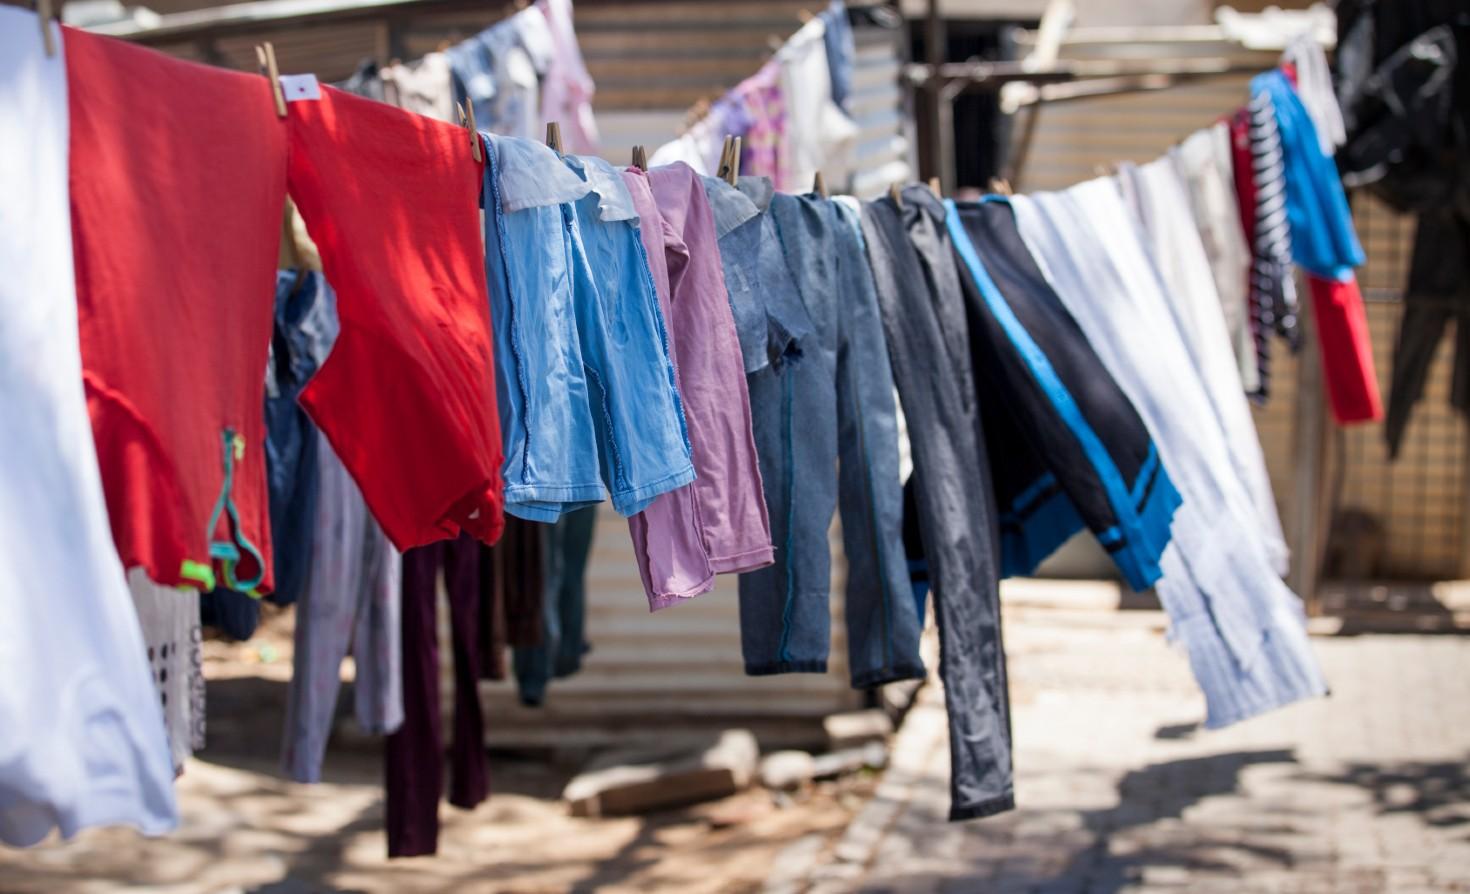 A clothesline in South Africa.